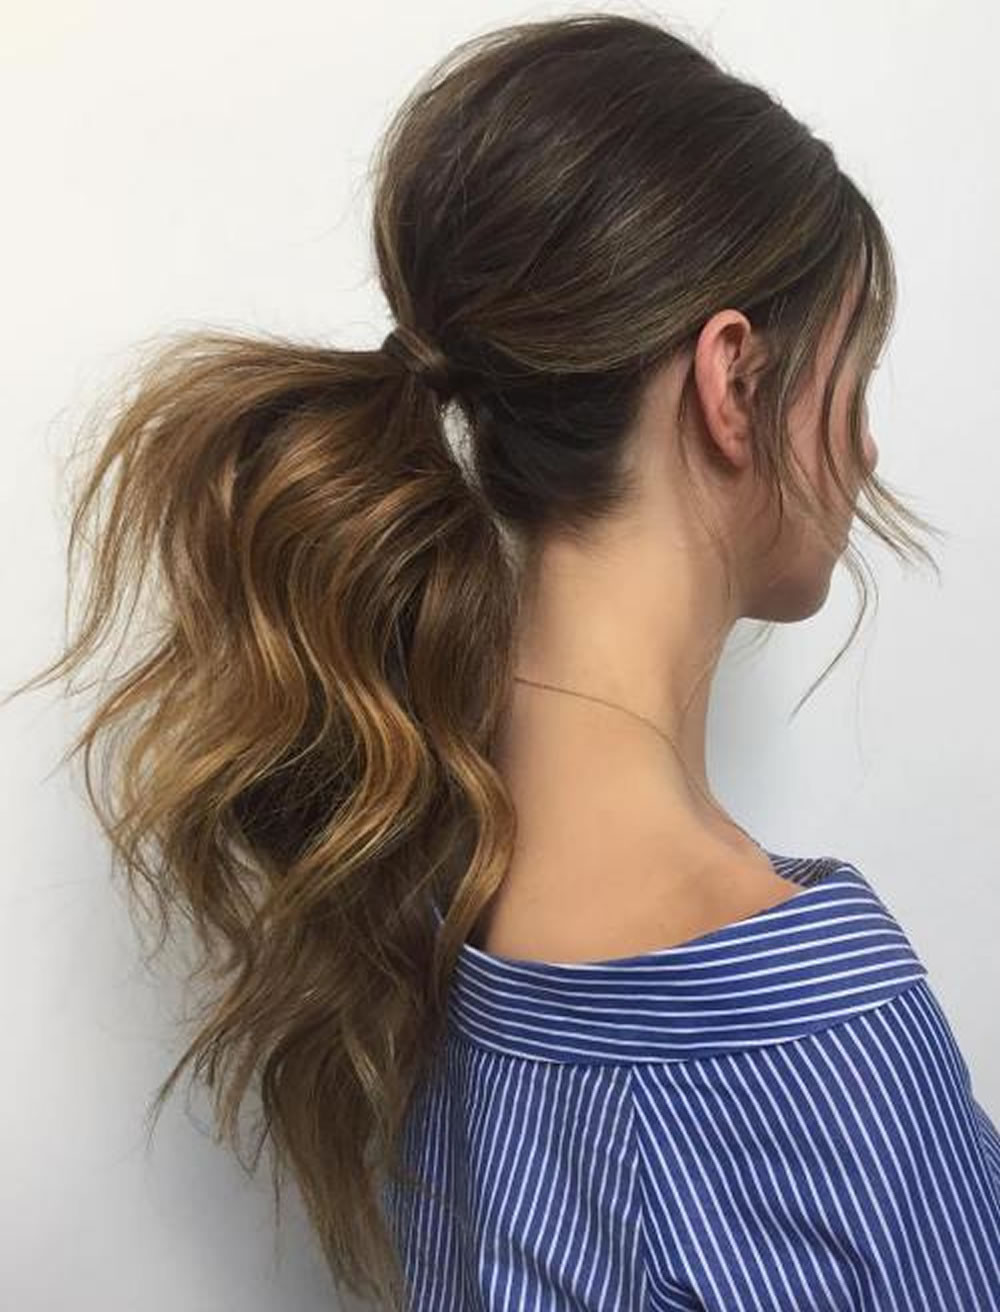 Cool Long Hairstyles
 The 20 Most Attractive Ponytail Hairstyles for Women